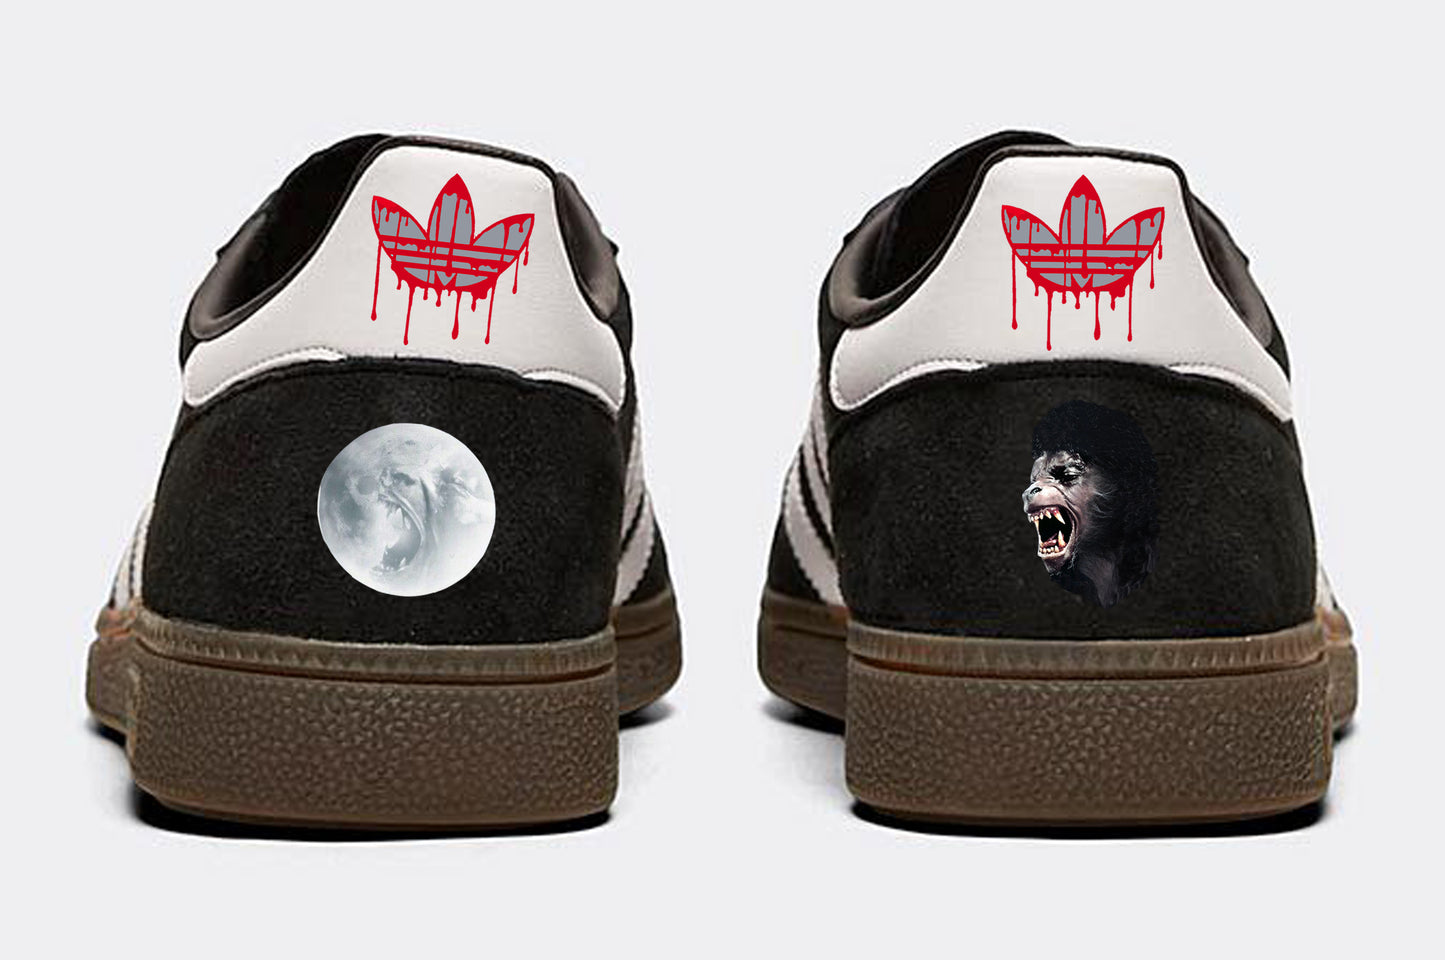 Limited edition An American Werewolf in London Black Adidas Spezial trainers / sneakers